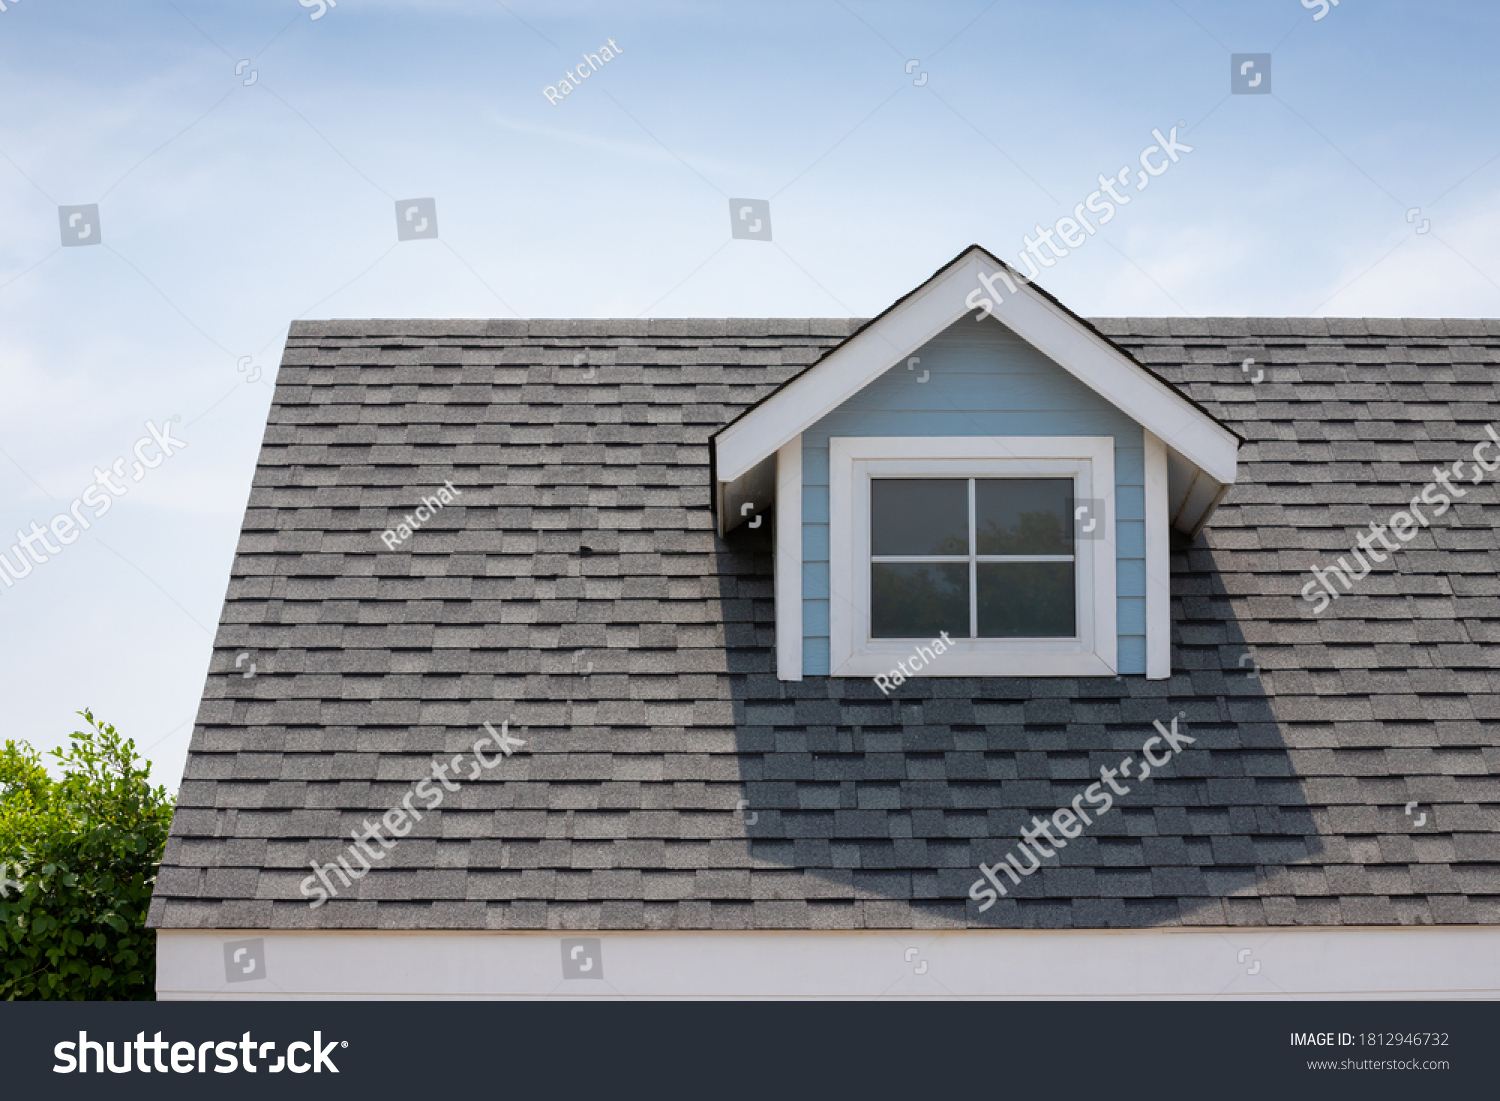 Roof shingles with garret house on top of the house among a lot of trees. dark asphalt tiles on the roof background #1812946732